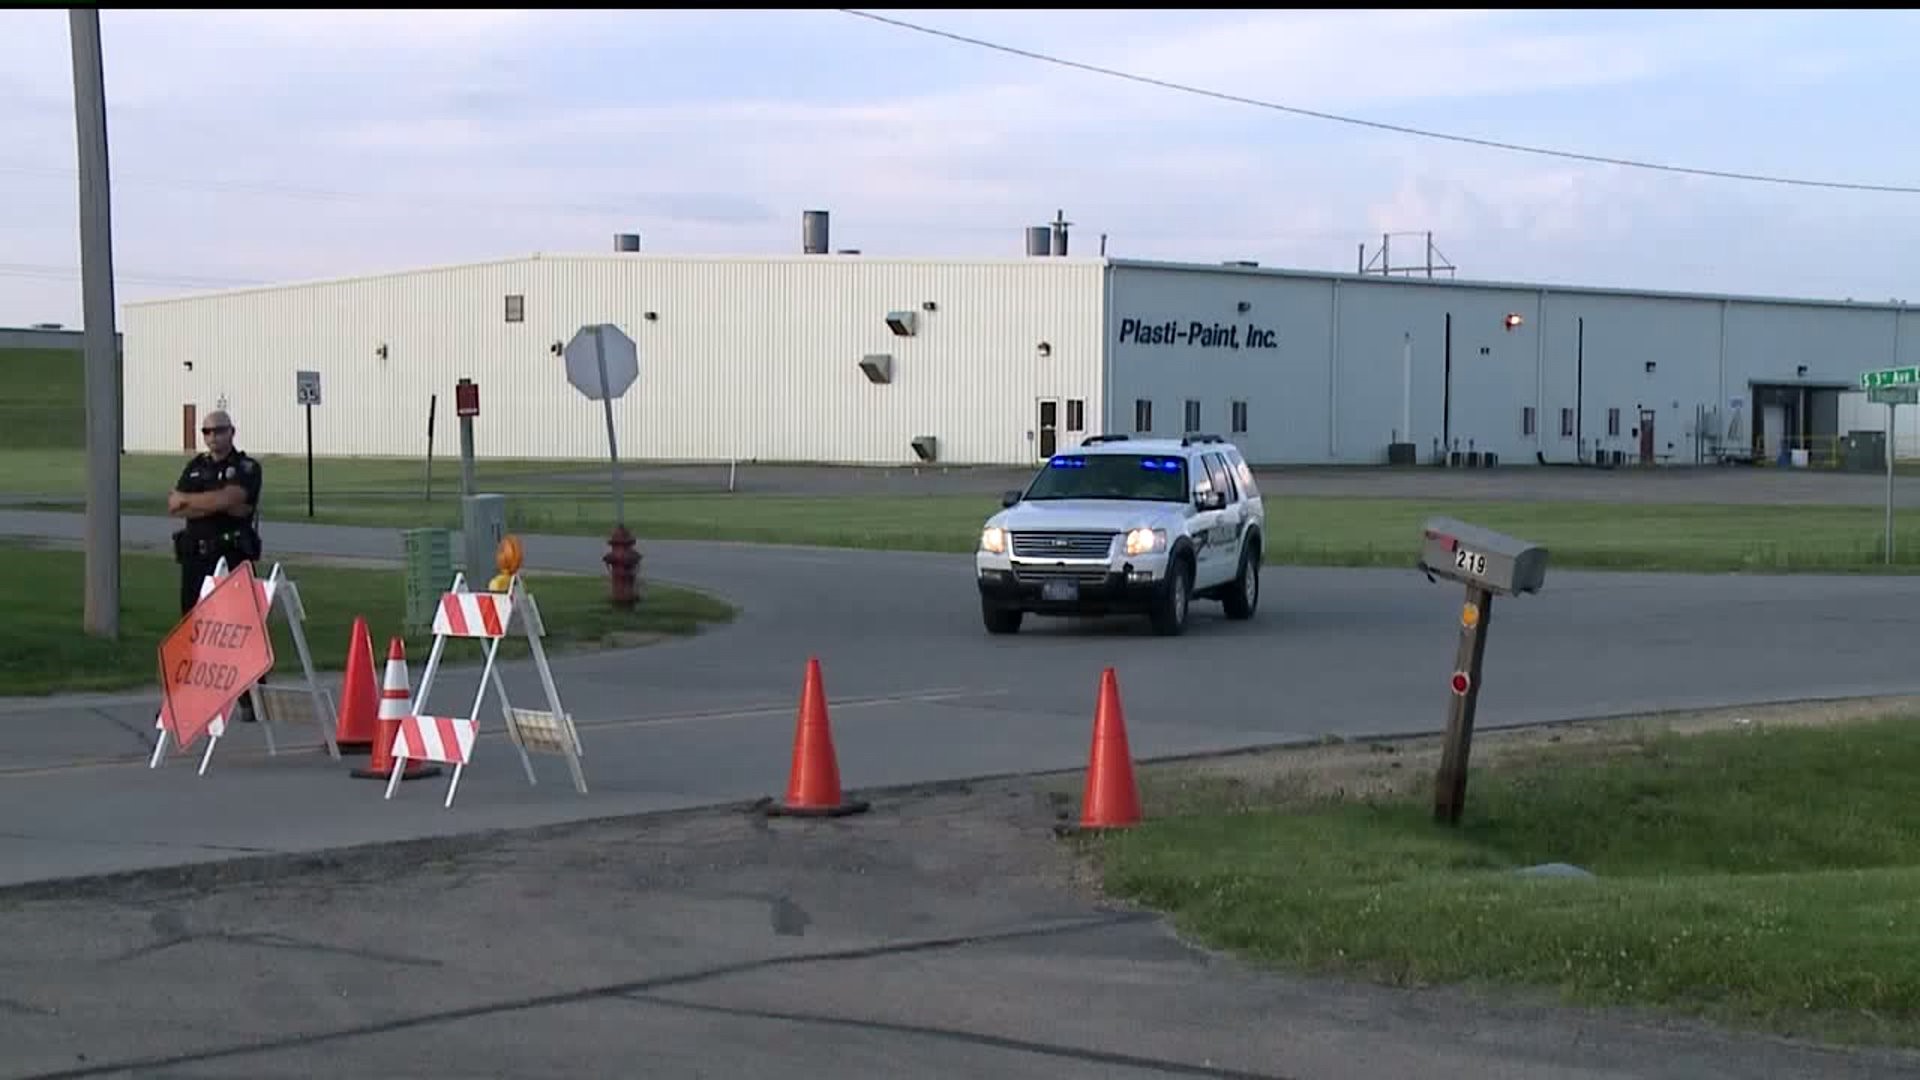 Guardian Glass in DeWitt asks employees to stay away from work for now